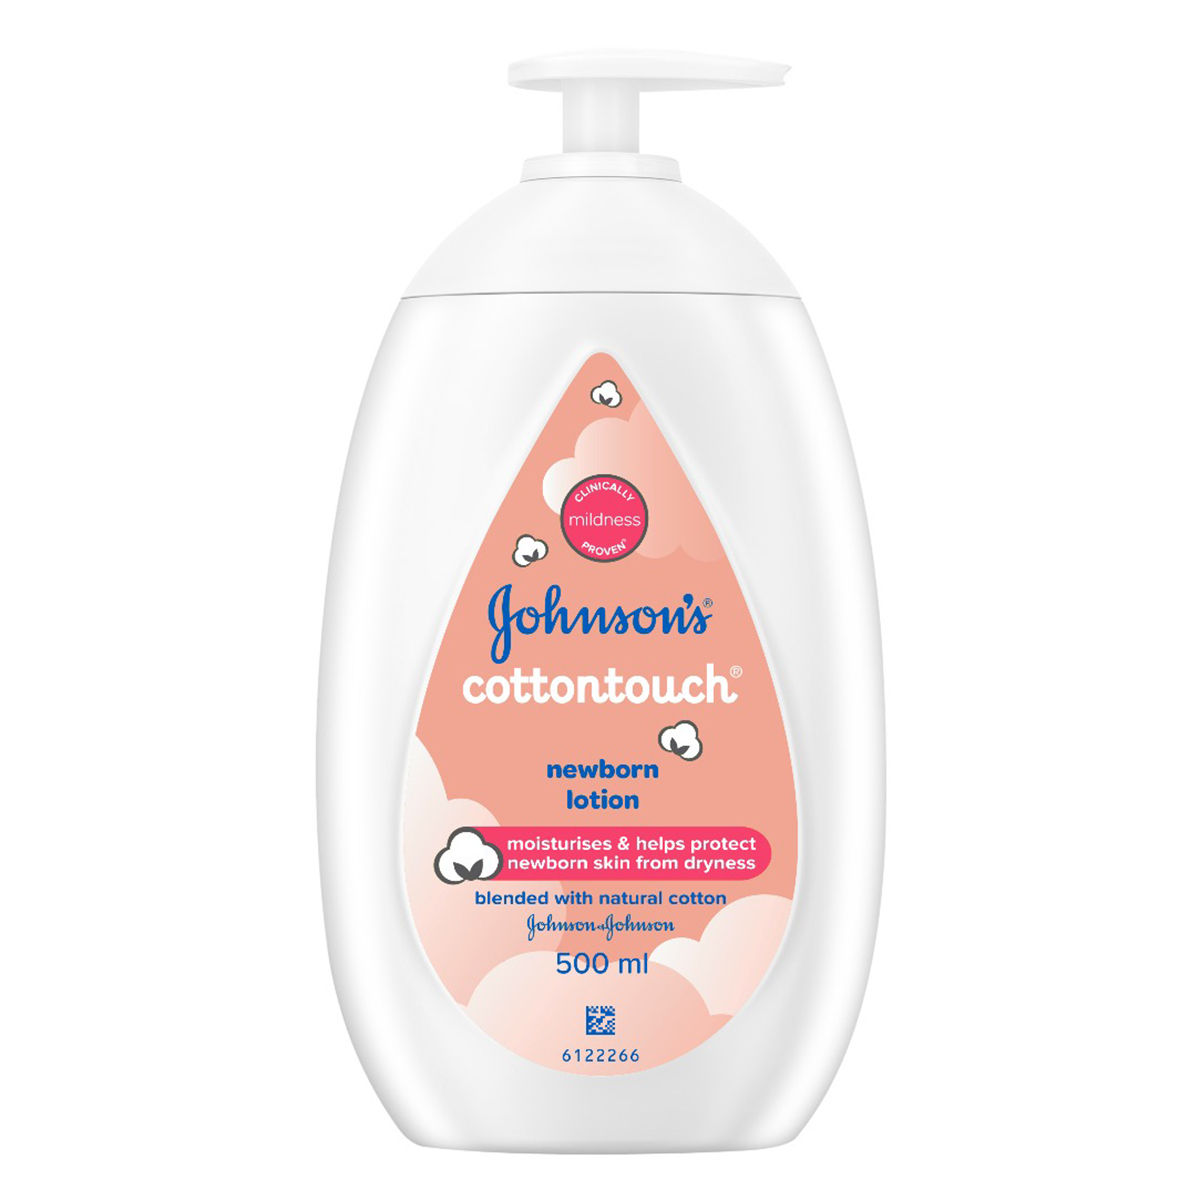 Buy Johnson's Cottontouch New Born Lotion, 500 ml Online